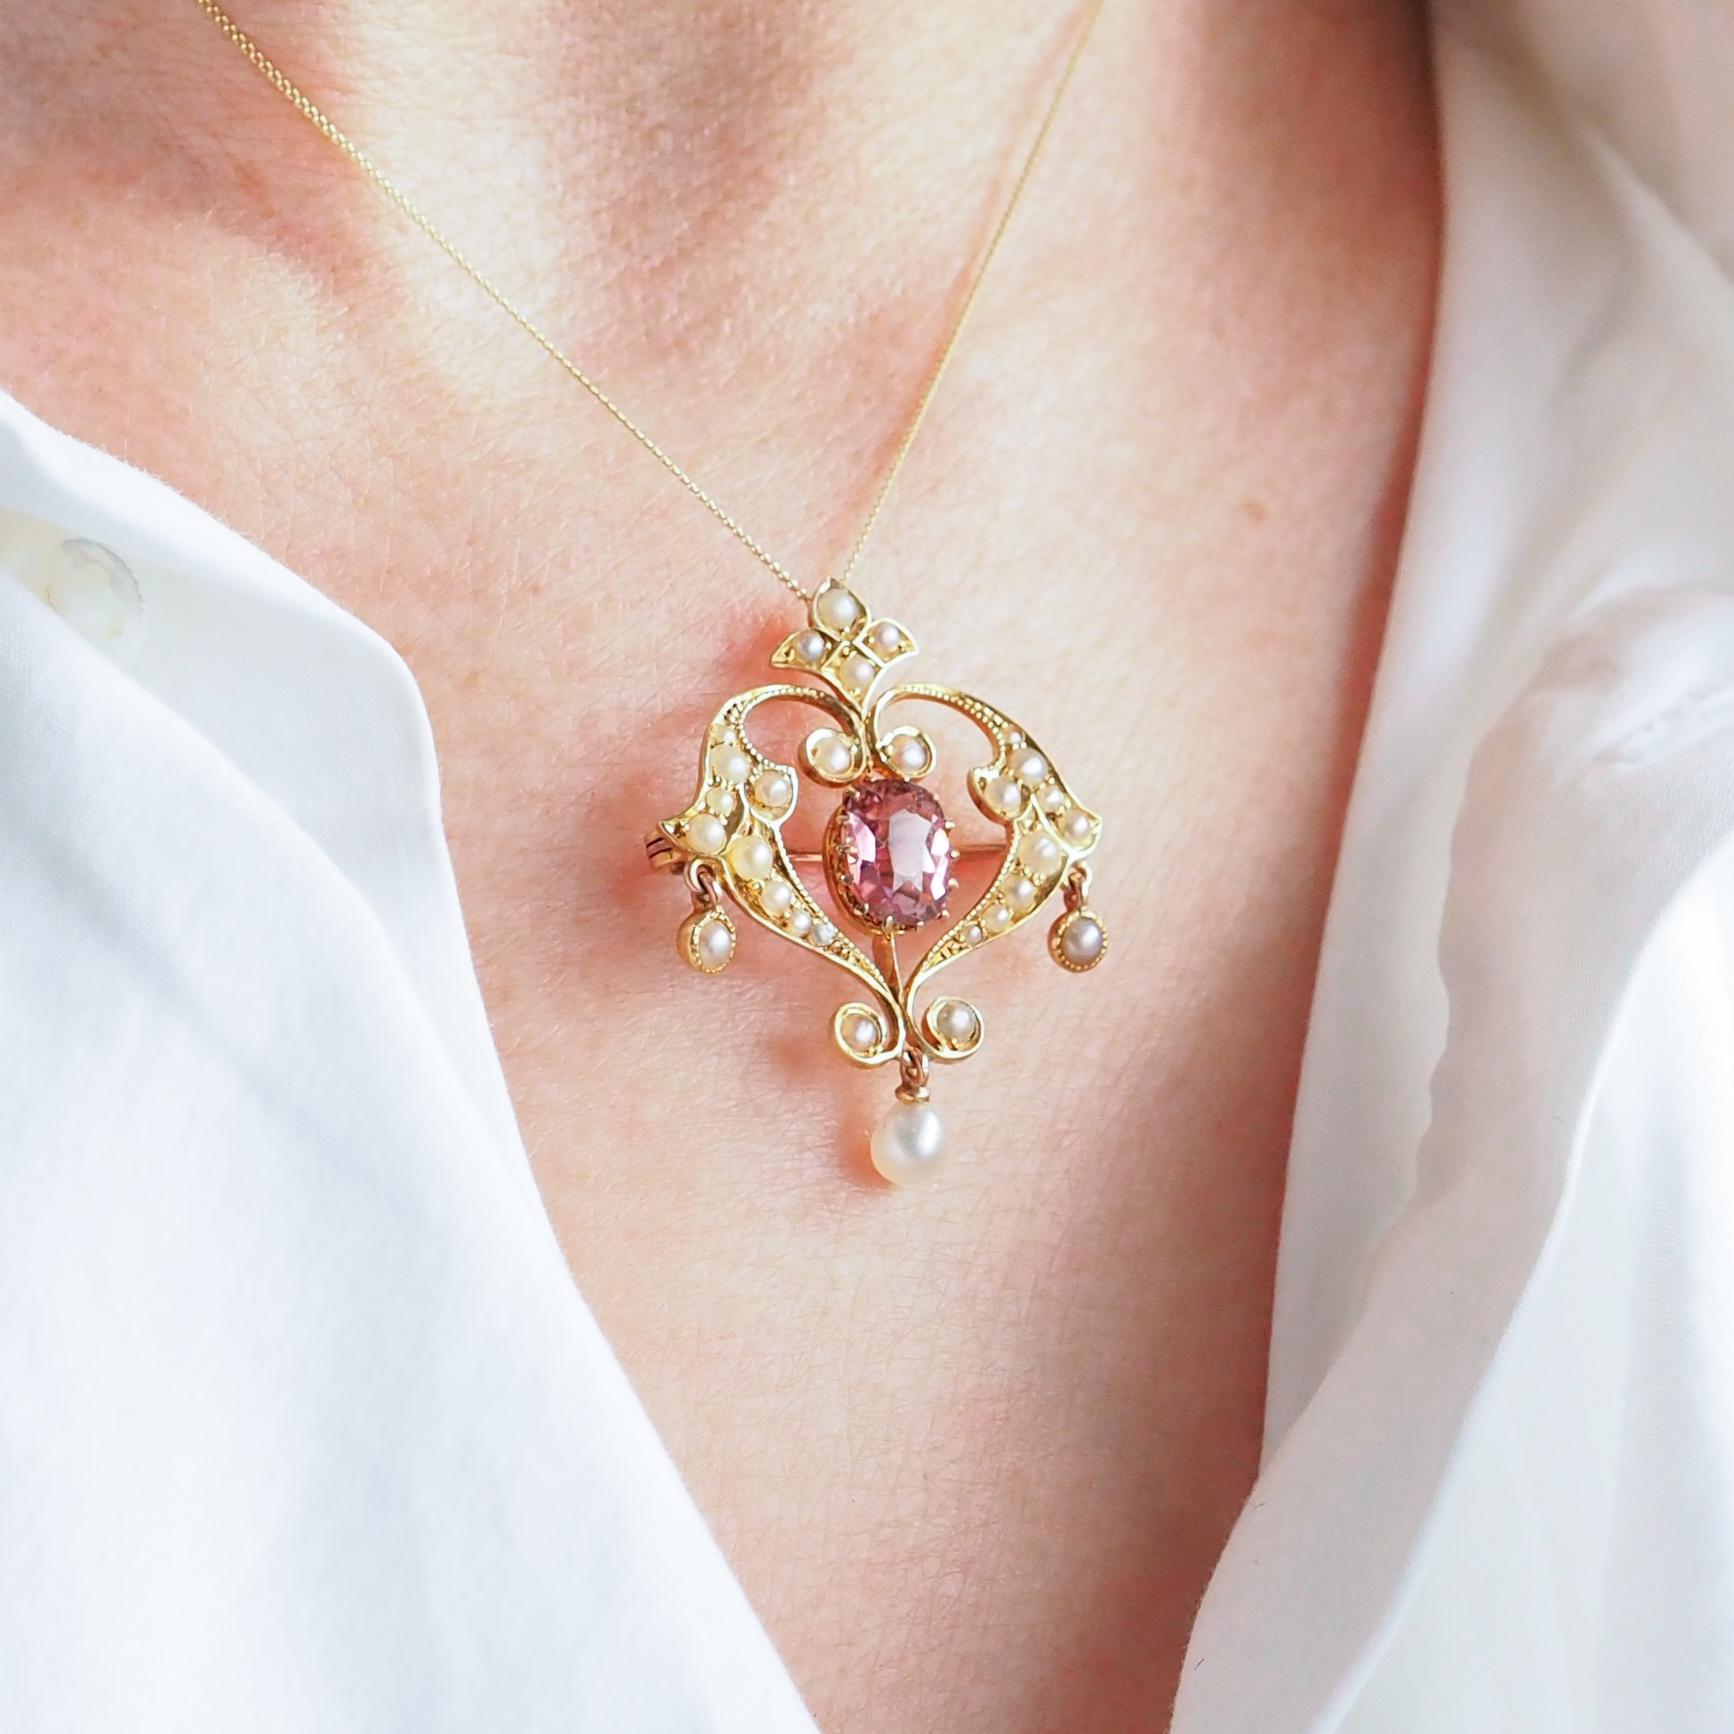 We are delighted to offer this stunning antique Edwardian pink tourmaline and seed pearl pendant necklace set in 15ct made c.1910.
 
The goldwork is beautifully crafted with a naturalistic art nouveau design of scrolled foliate motifs.
 
The pendant